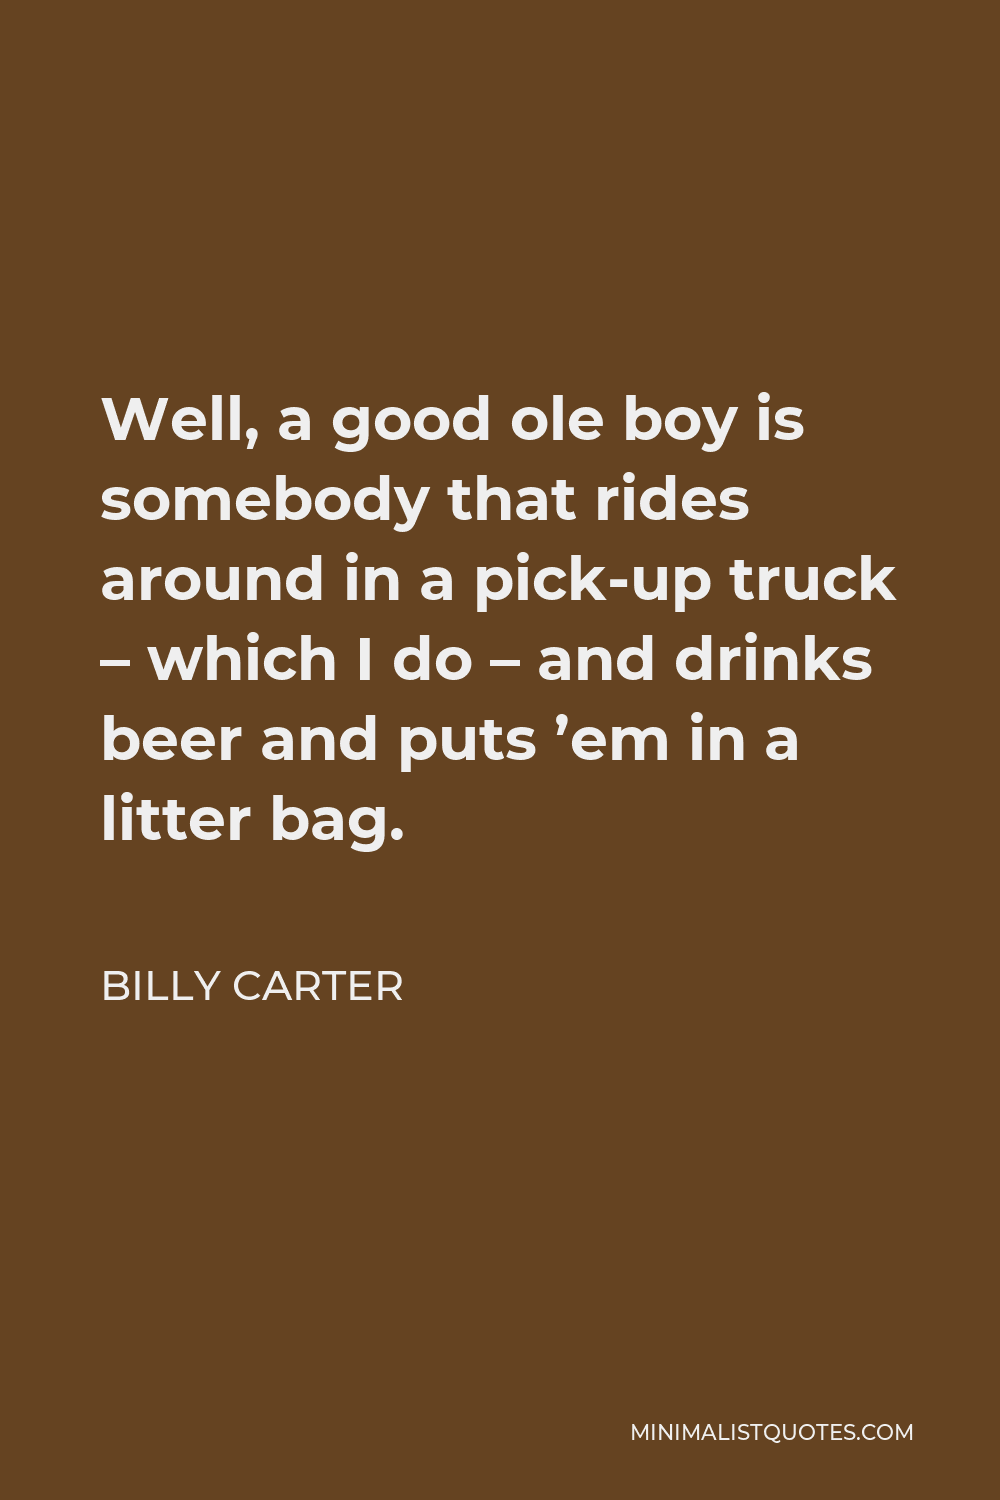 Billy Carter Quote - Well, a good ole boy is somebody that rides around in a pick-up truck – which I do – and drinks beer and puts ’em in a litter bag.